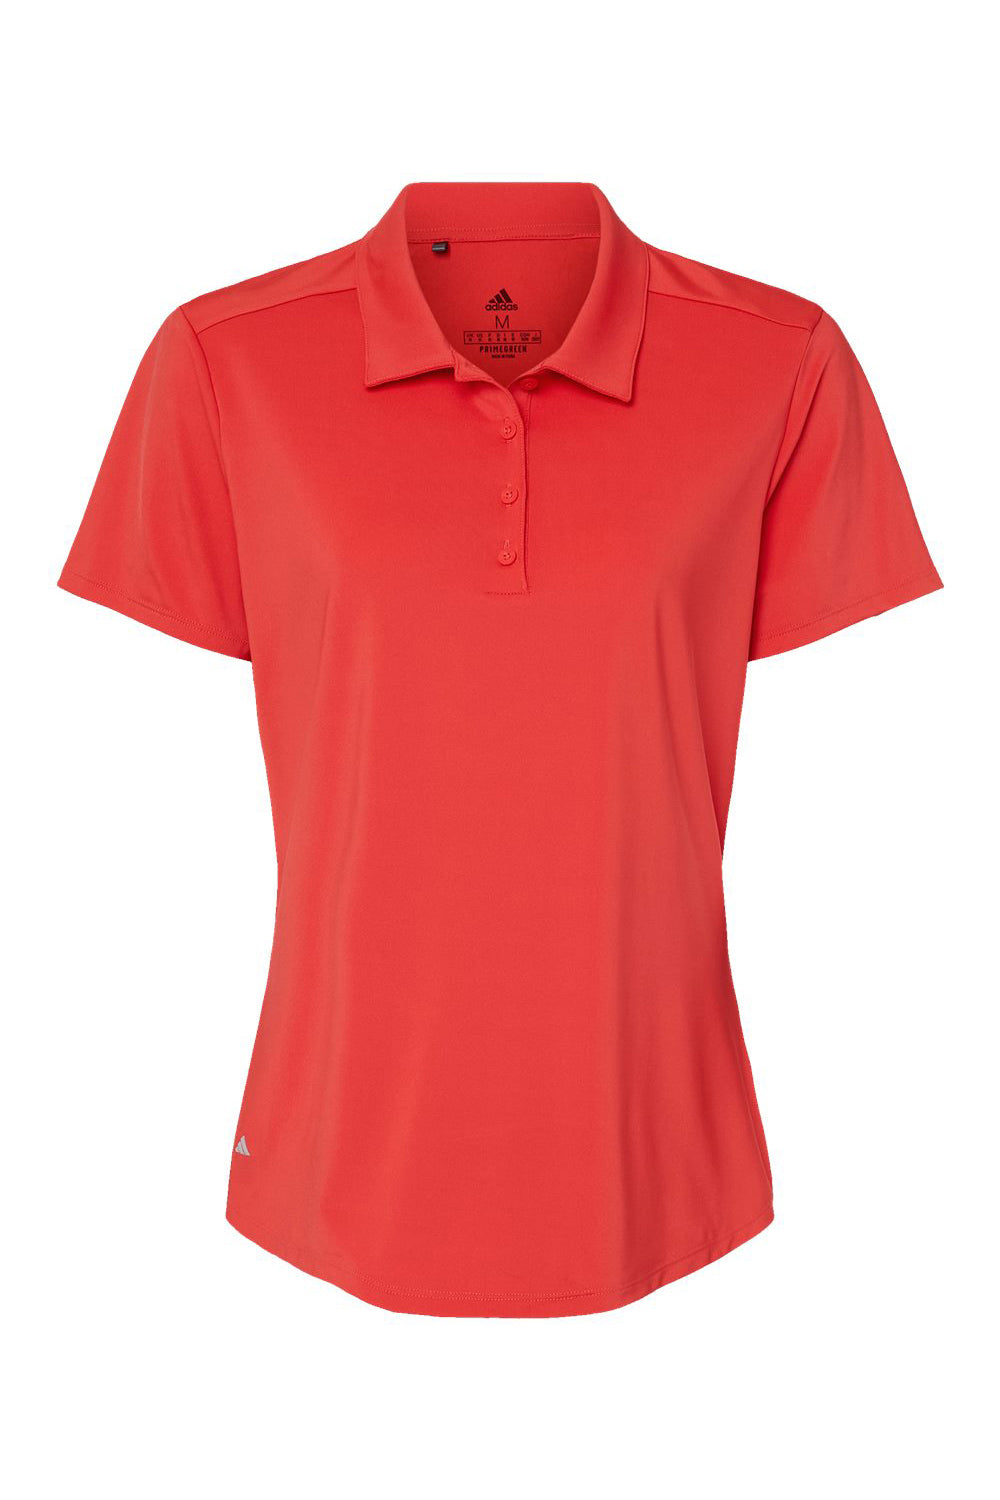 Adidas A515 Womens Ultimate Short Sleeve Polo Shirt Real Coral Flat Front